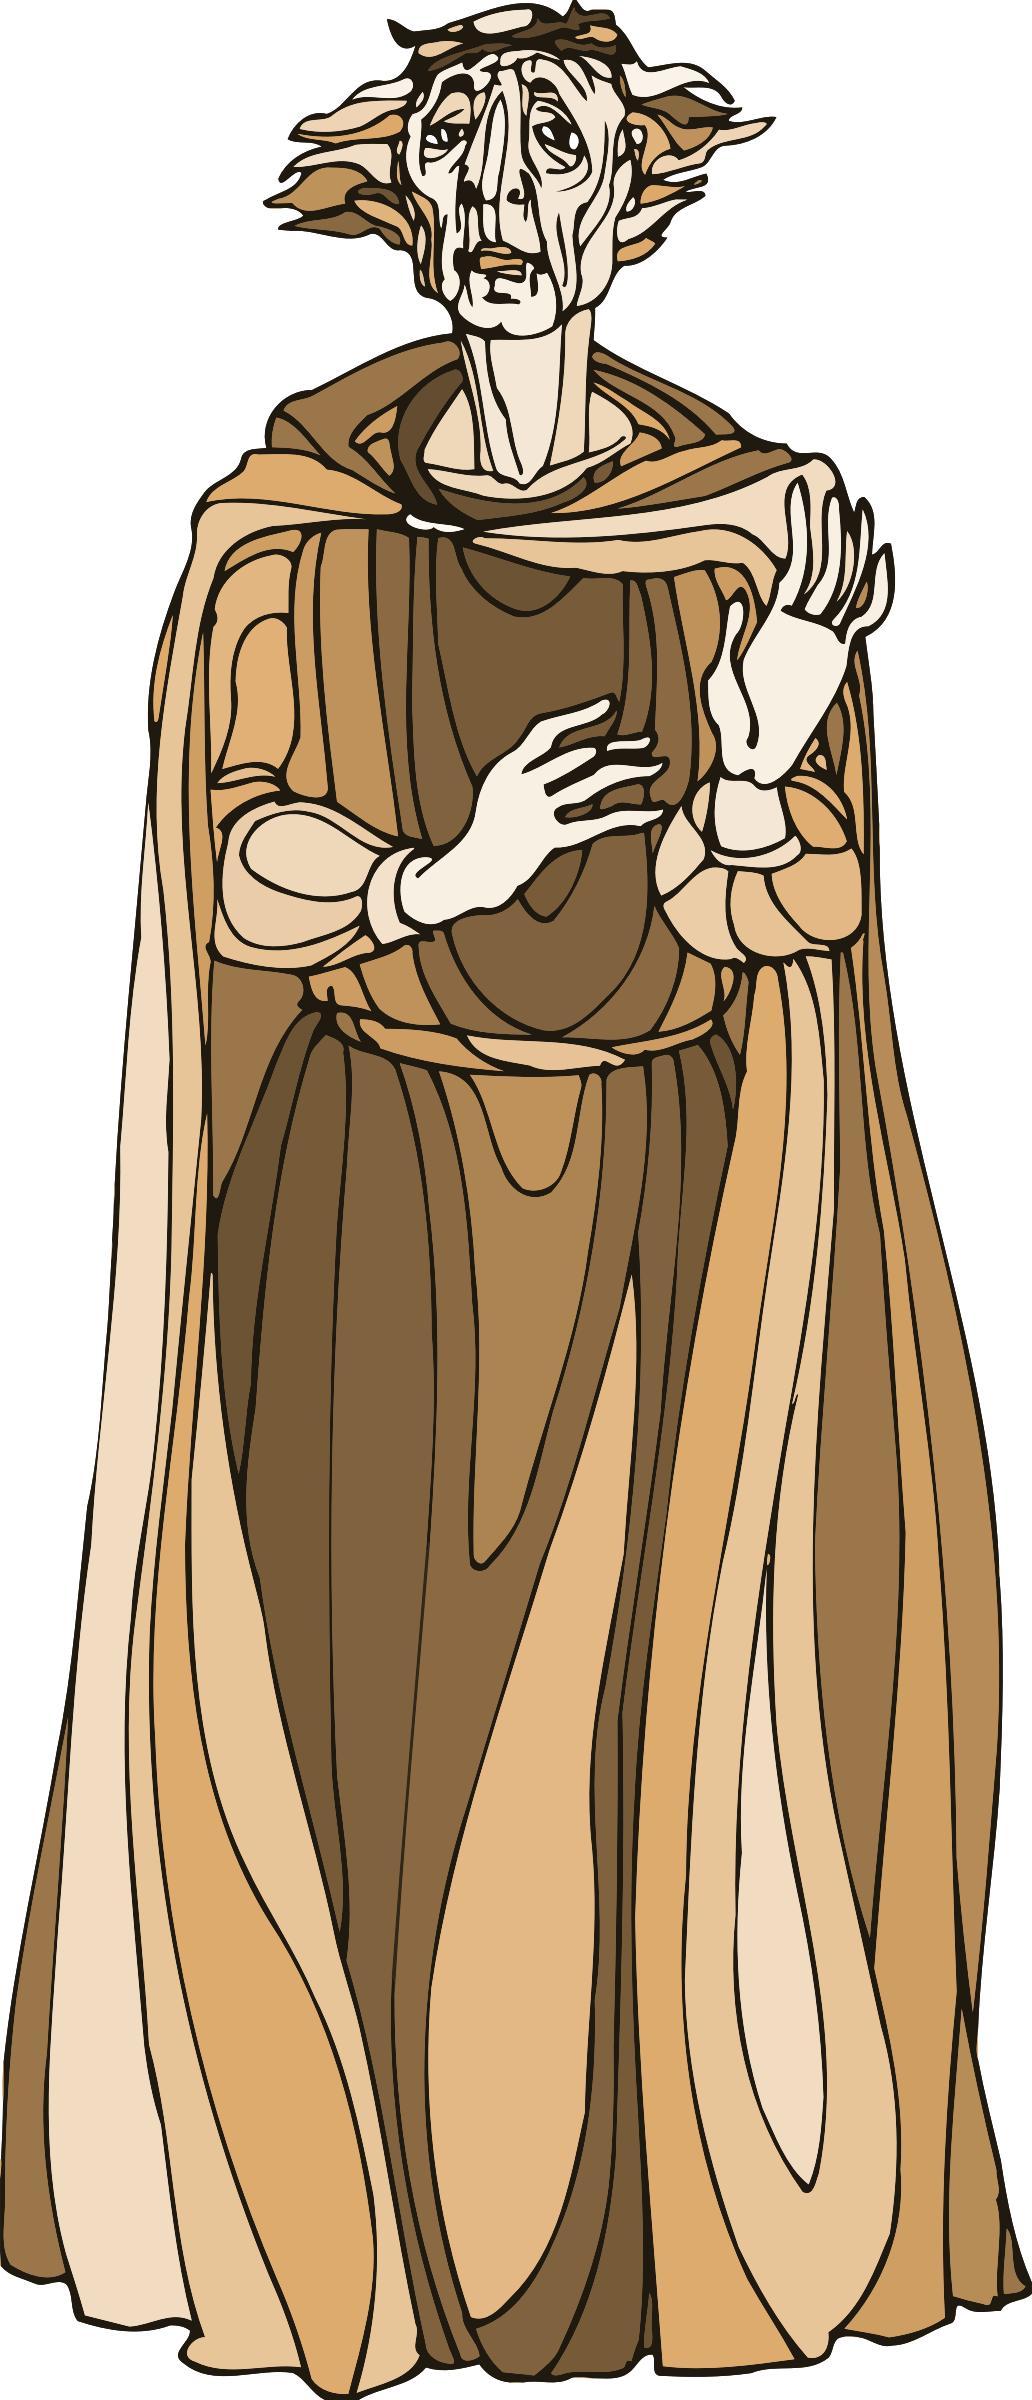 Shakespeare characters - King Lear png transparent